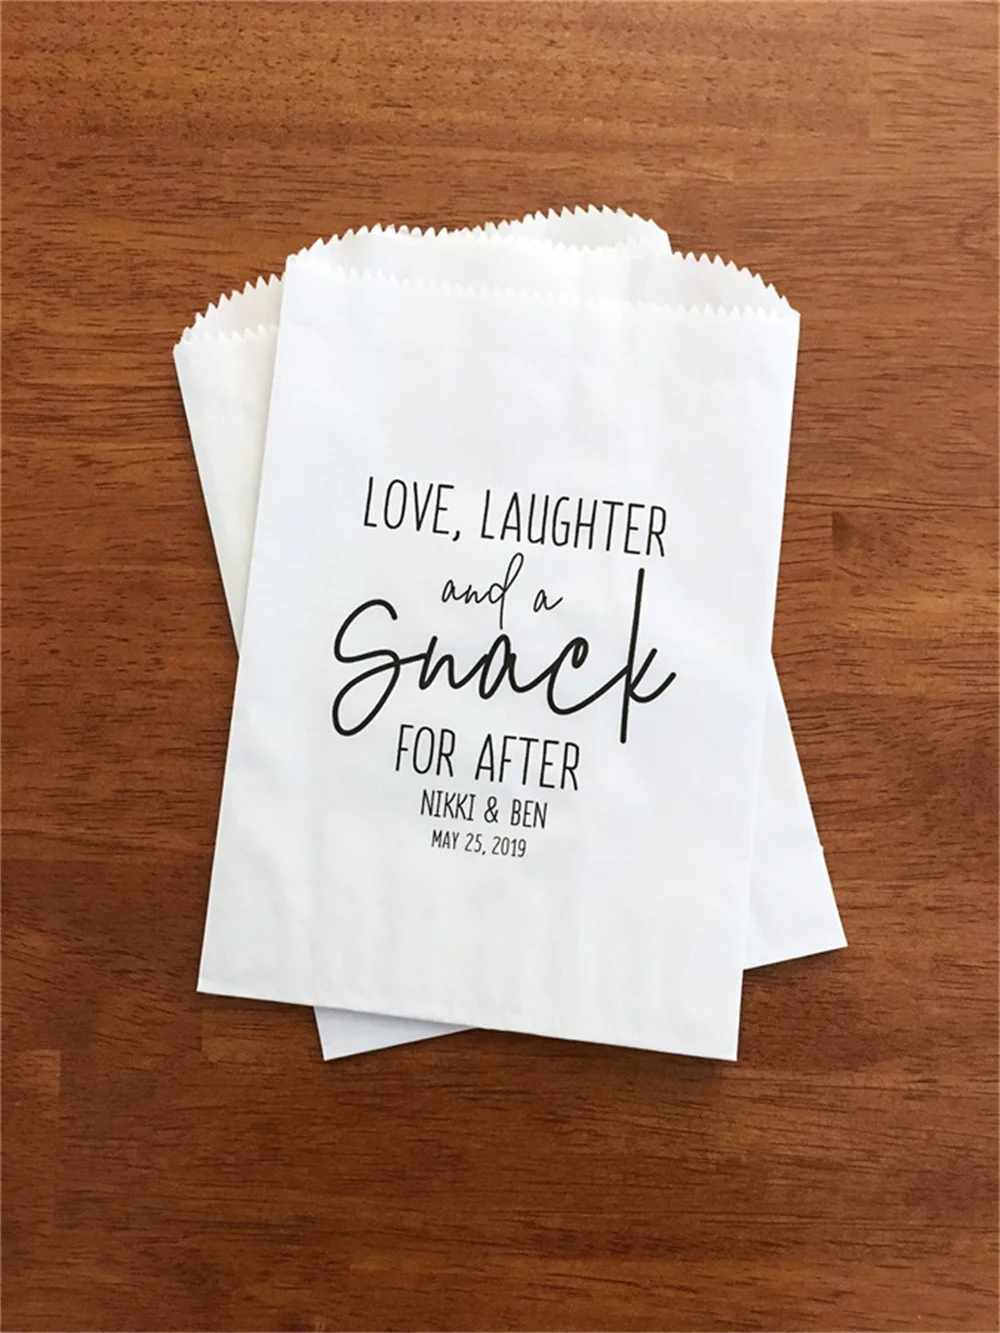 

50 LINED Wedding Favor Bags for Guests - Wedding Cookie Bags, Candy Bags, Dessert Bags, Donut Bags - Love Laughter and a Snack